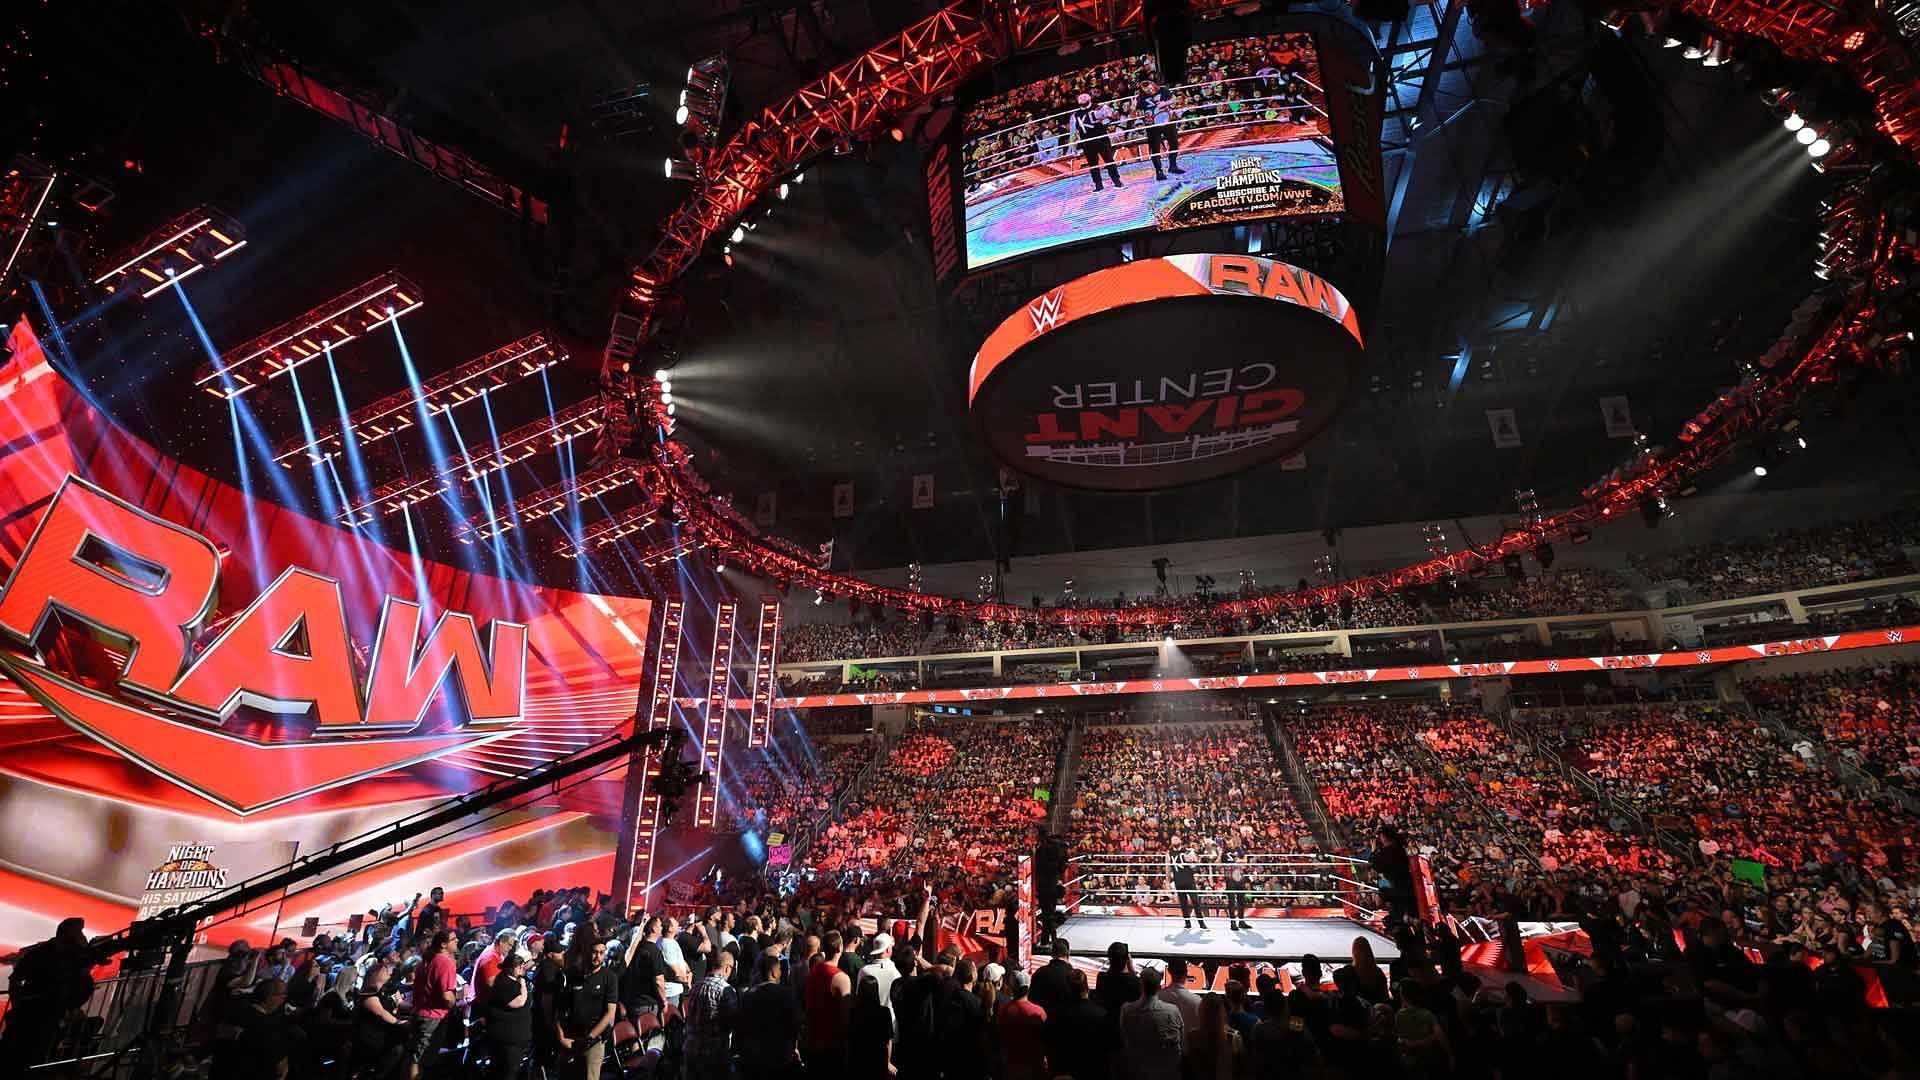 The WWE Universe packs arena for a live RAW taping